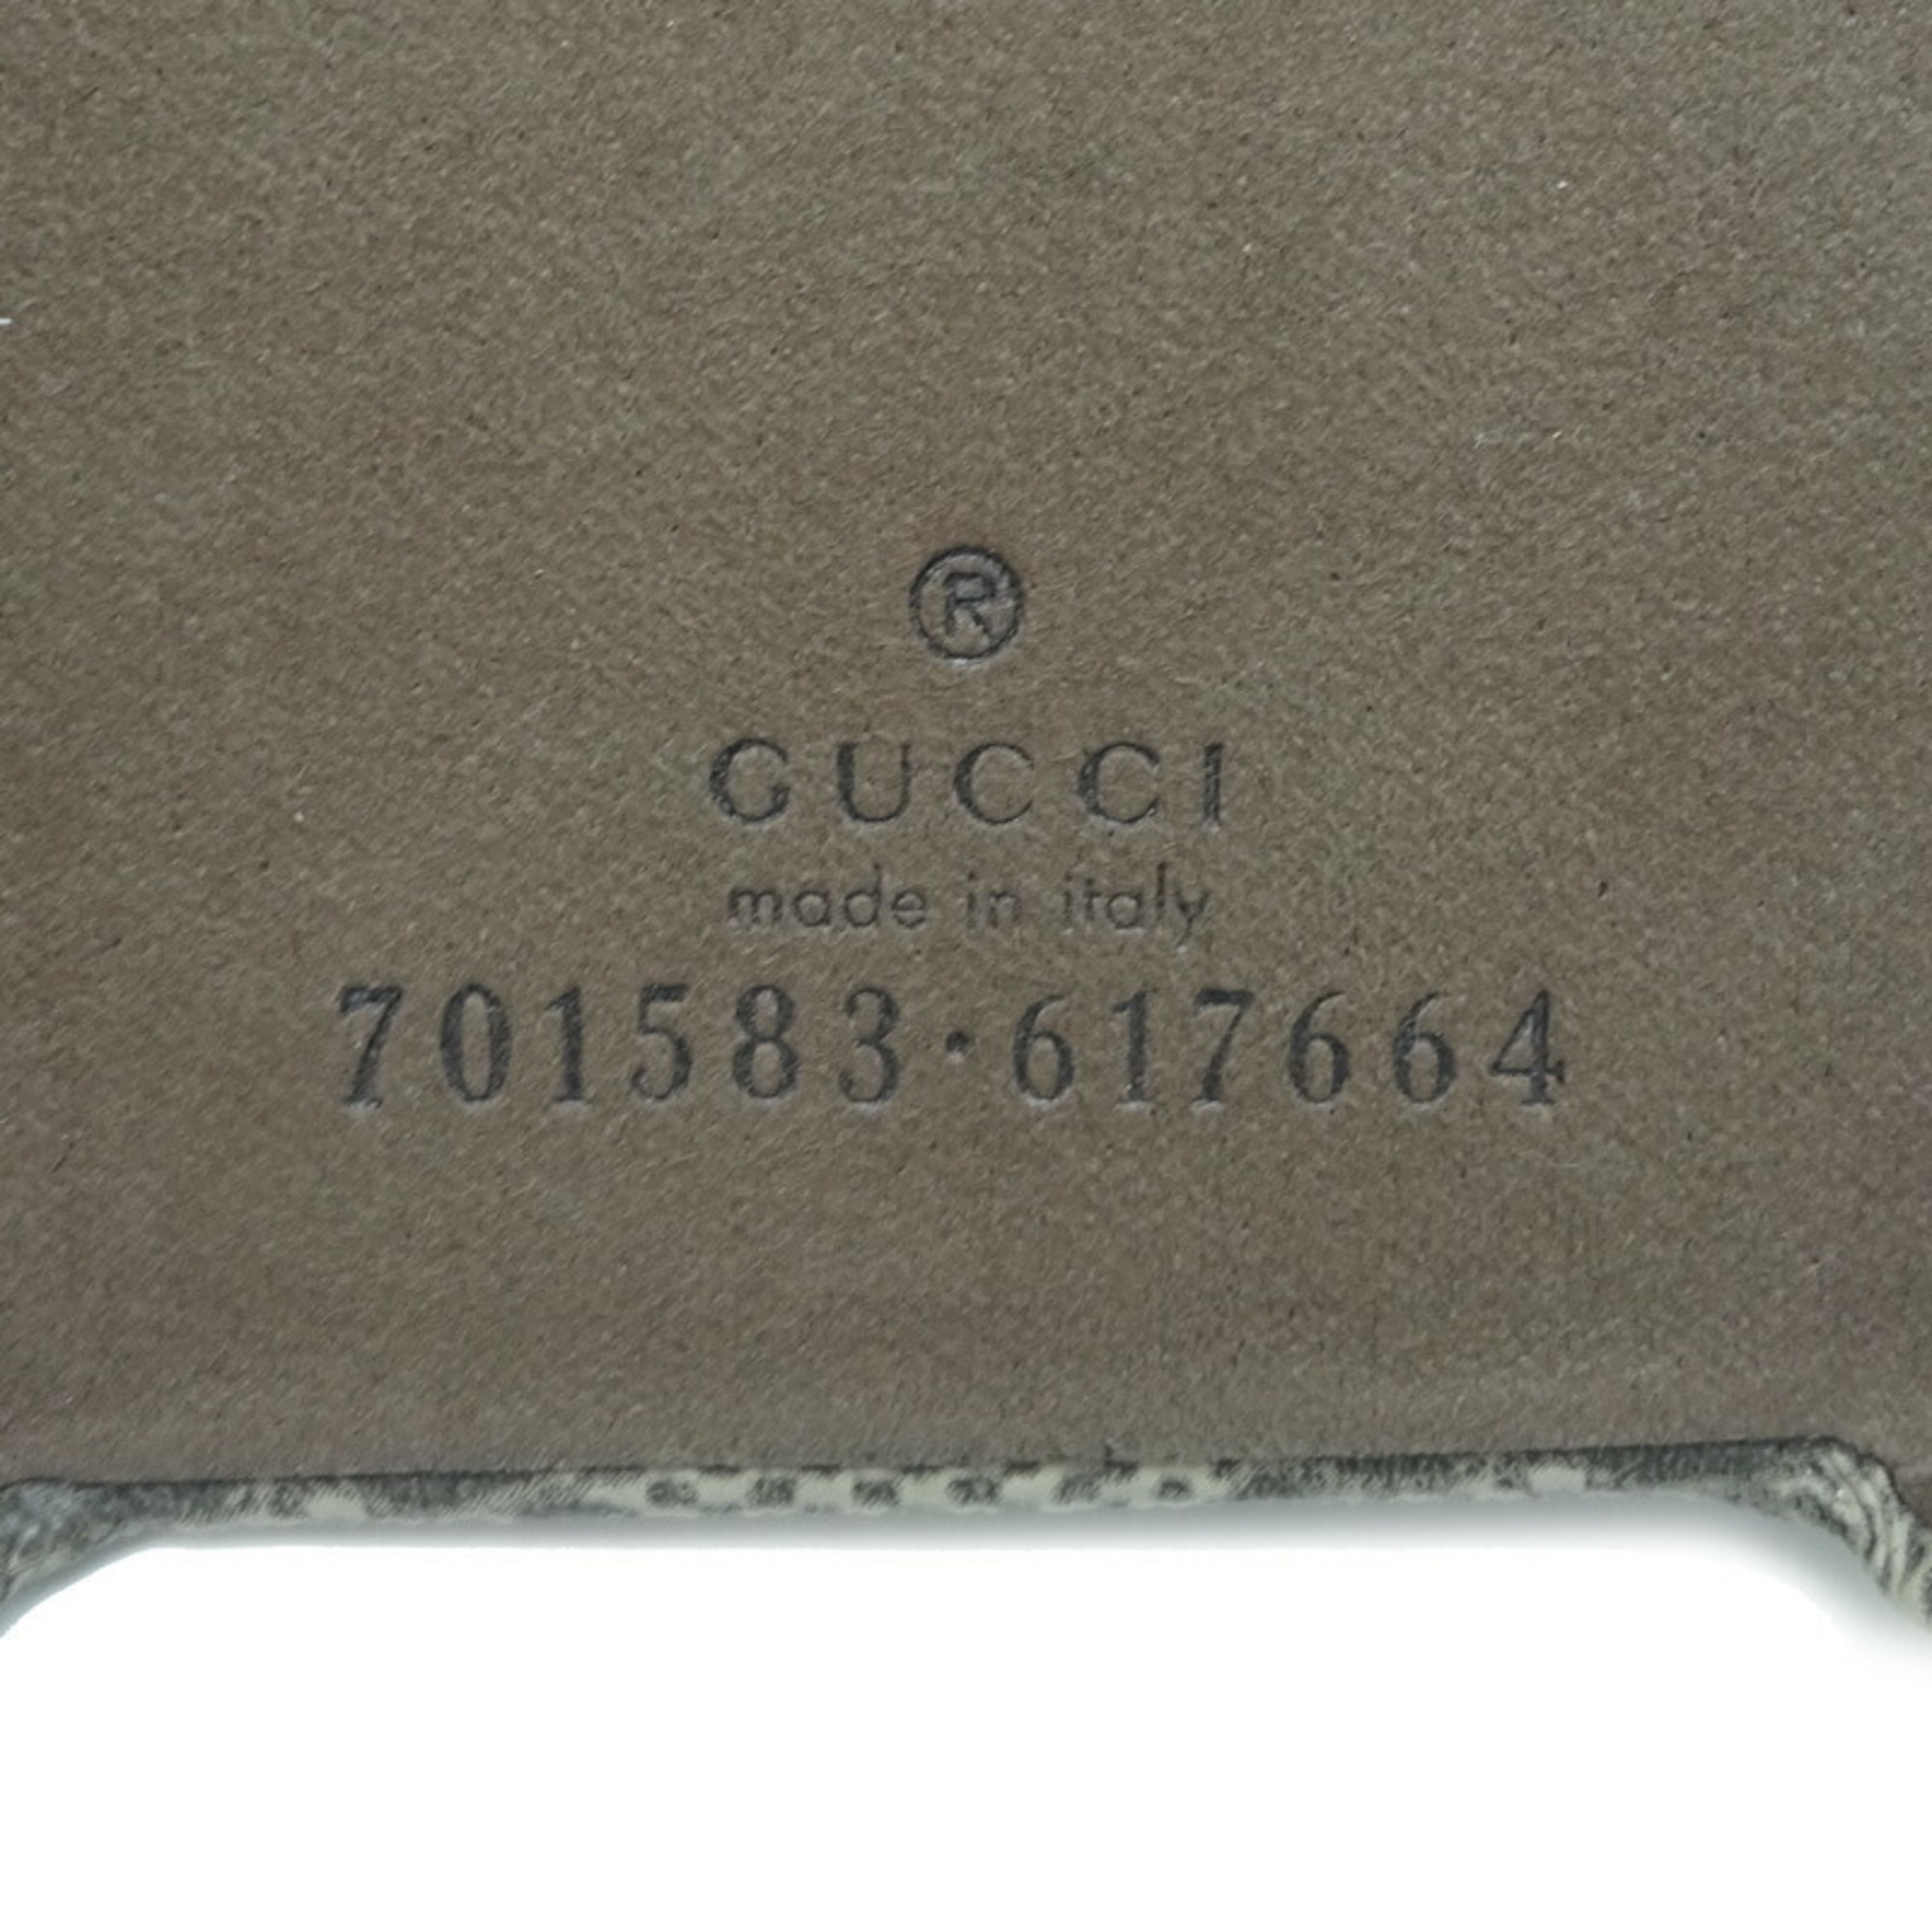 Gucci iPhone case for women and men, mobile phone smartphone 617664 GG Supreme Brown